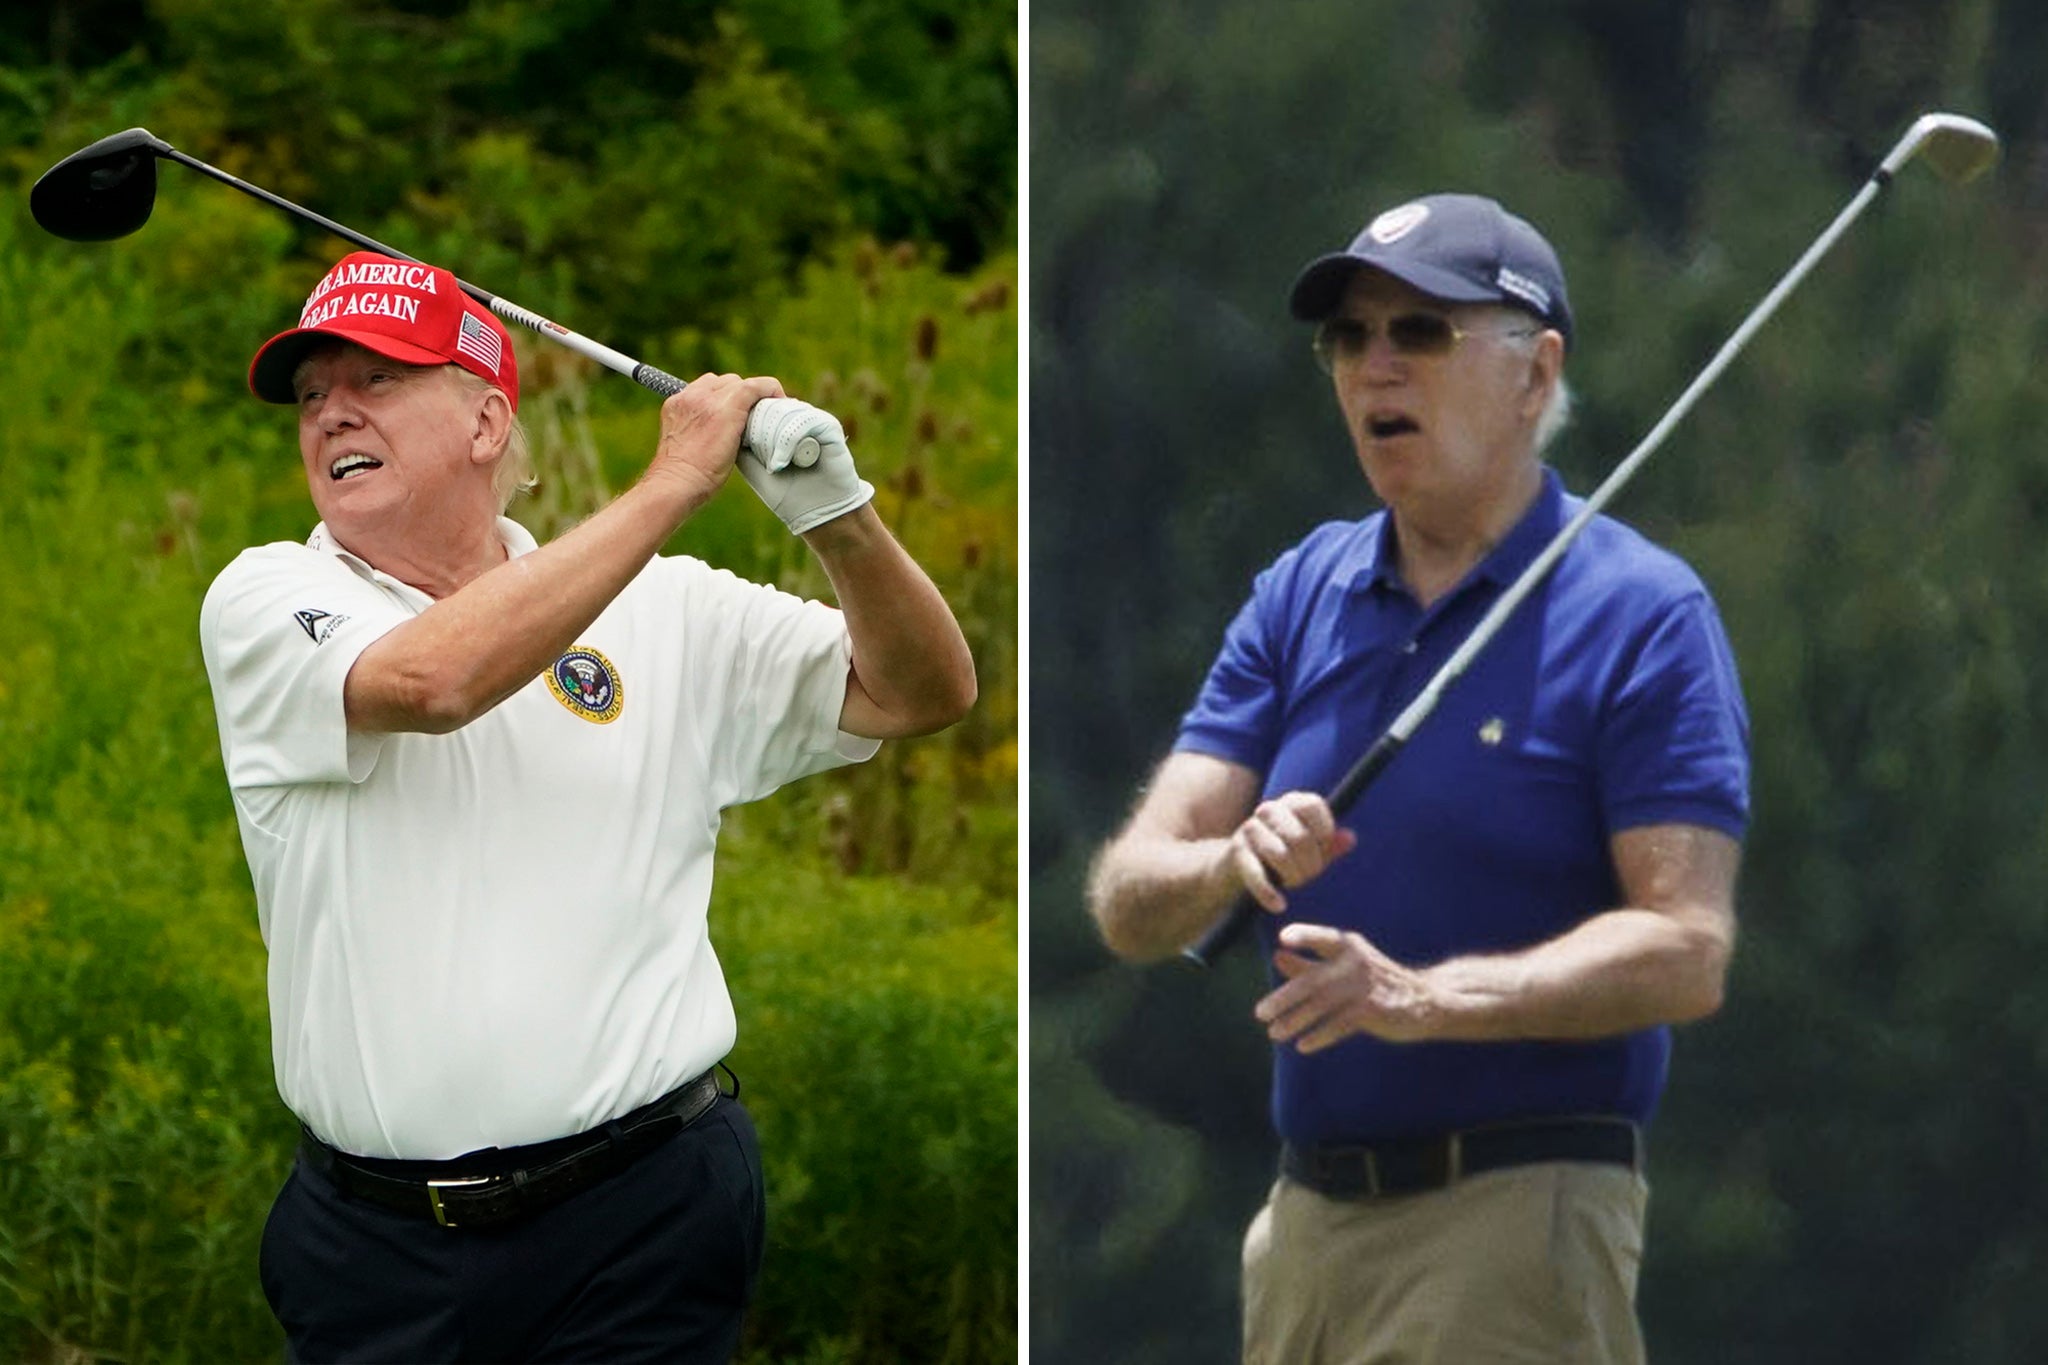 Trump says Biden couldn’t hit a 50 yard drive. Biden says Trump couldn’t lift his own golf bag. The race for the world’s most powerful job continues